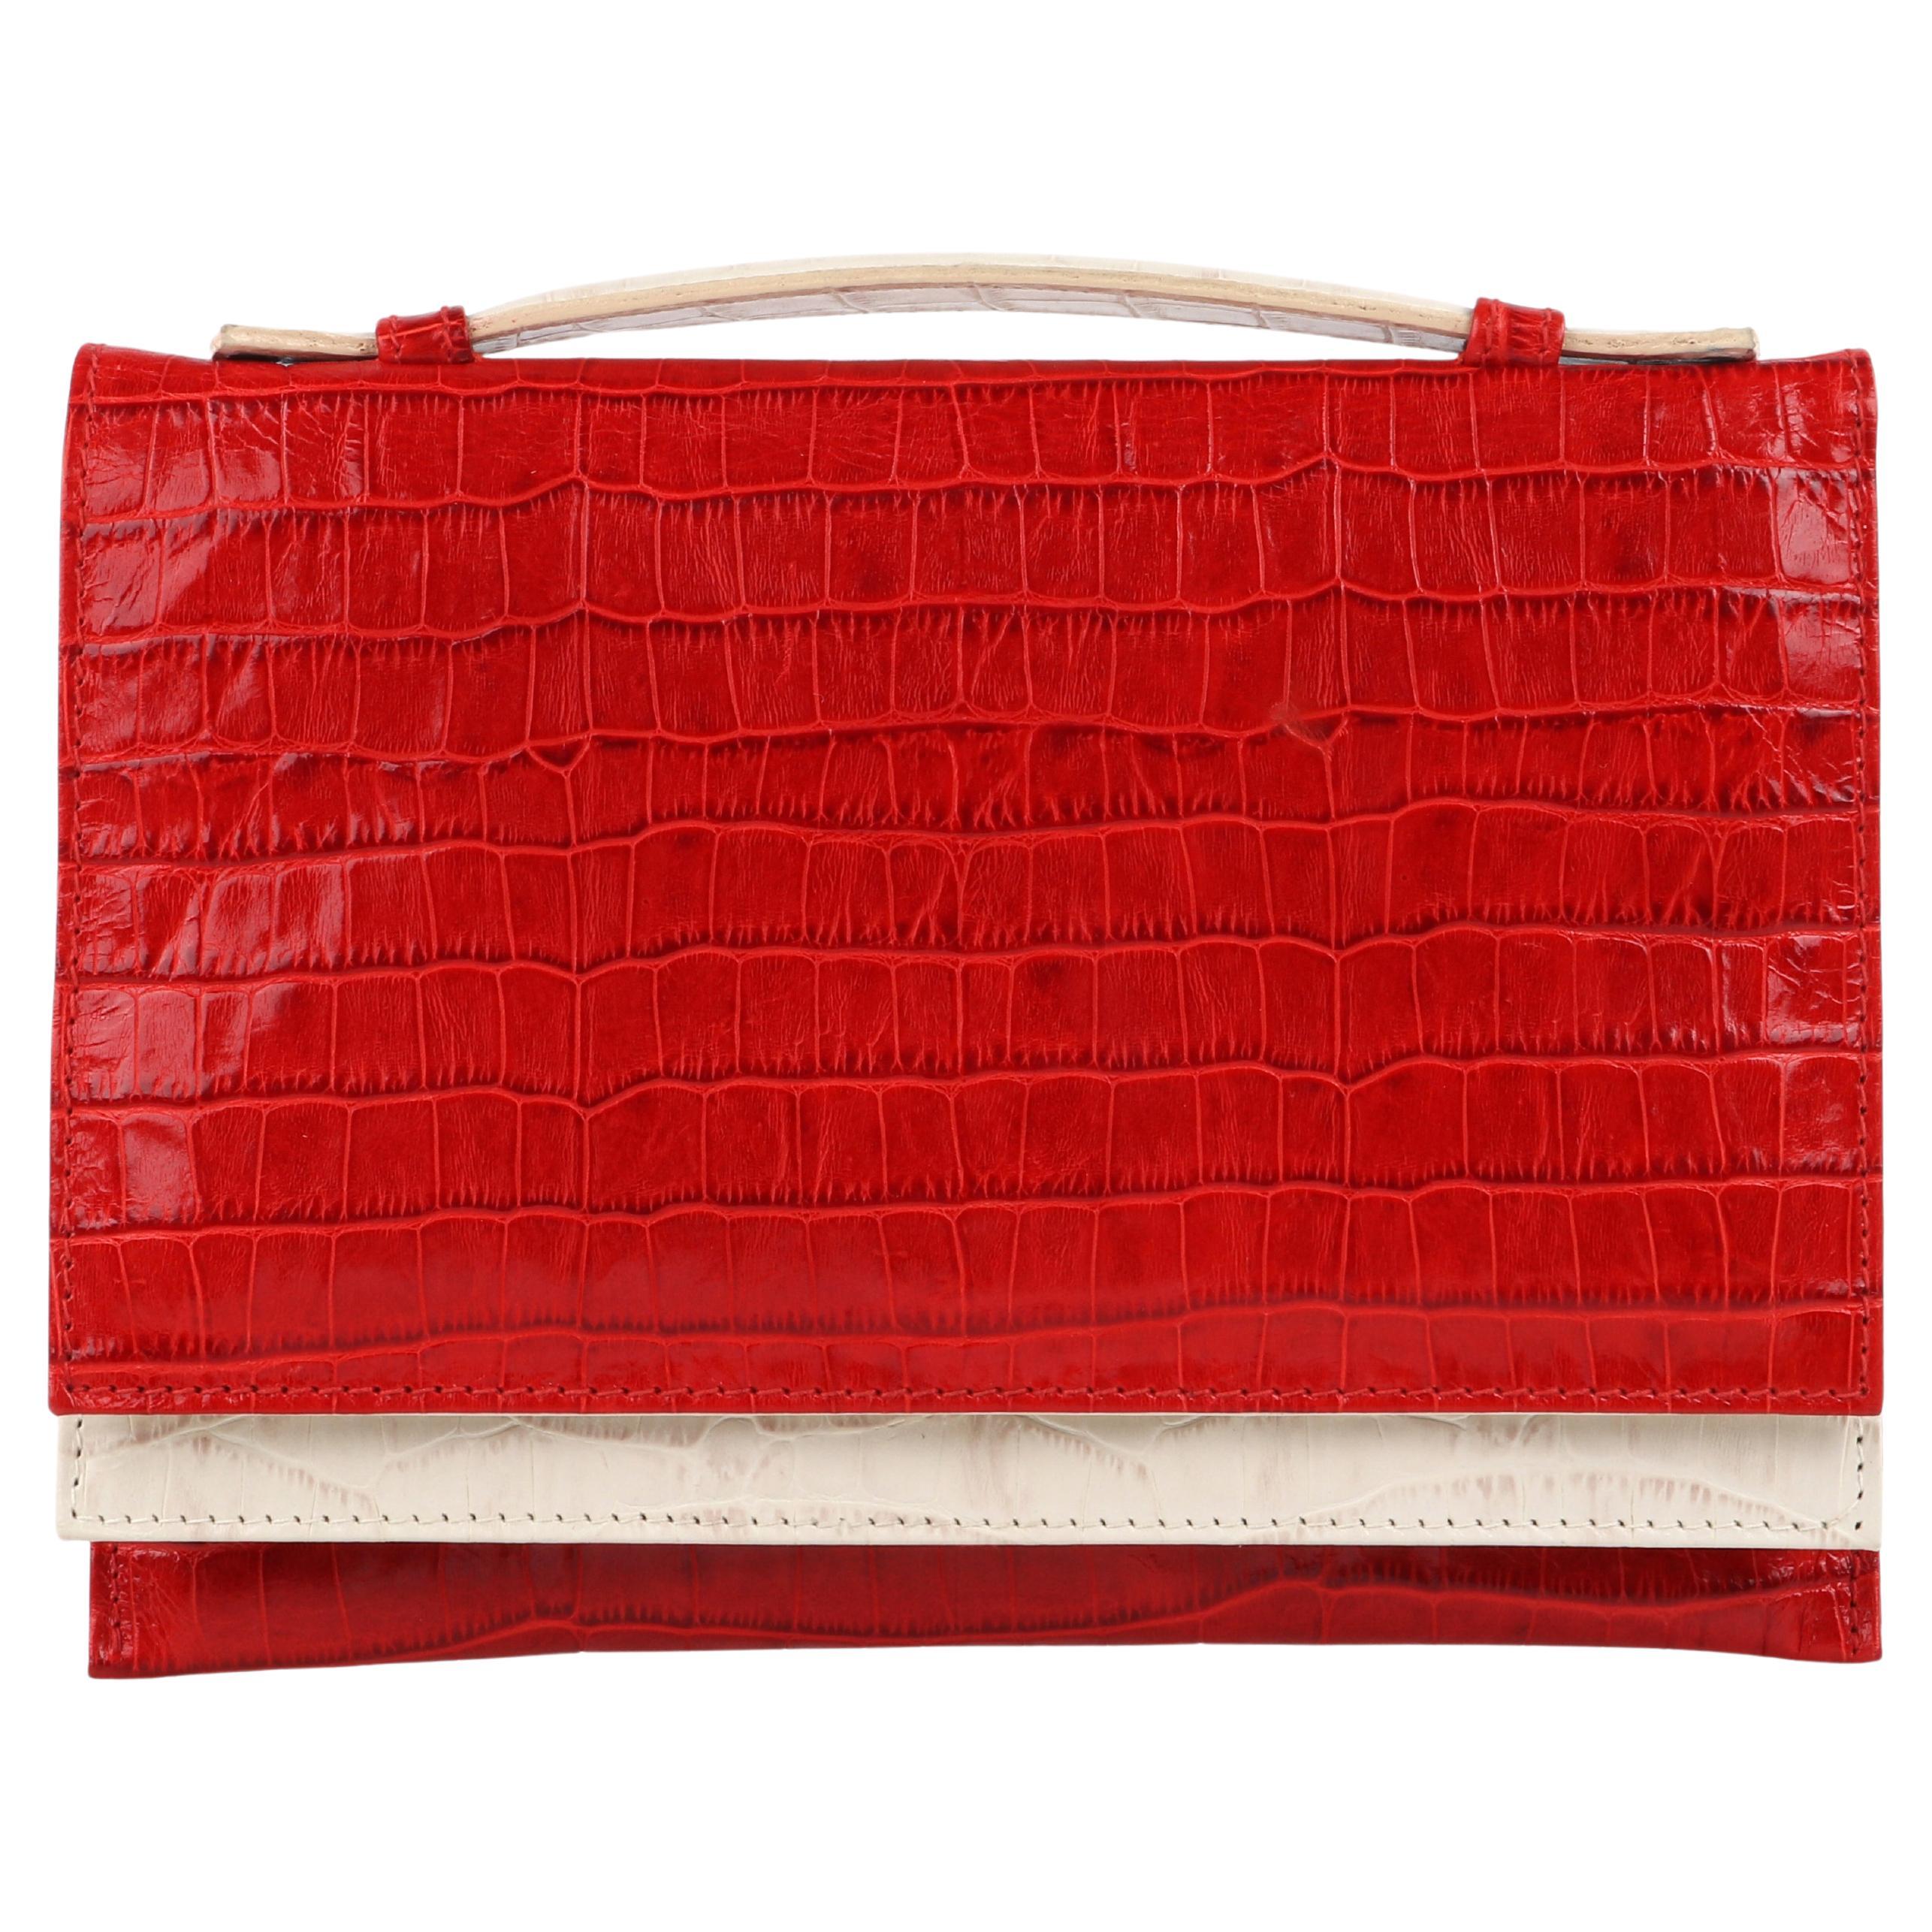 Red Leather Clutch Bag | Evening Bag and Clutches |Greek Chic